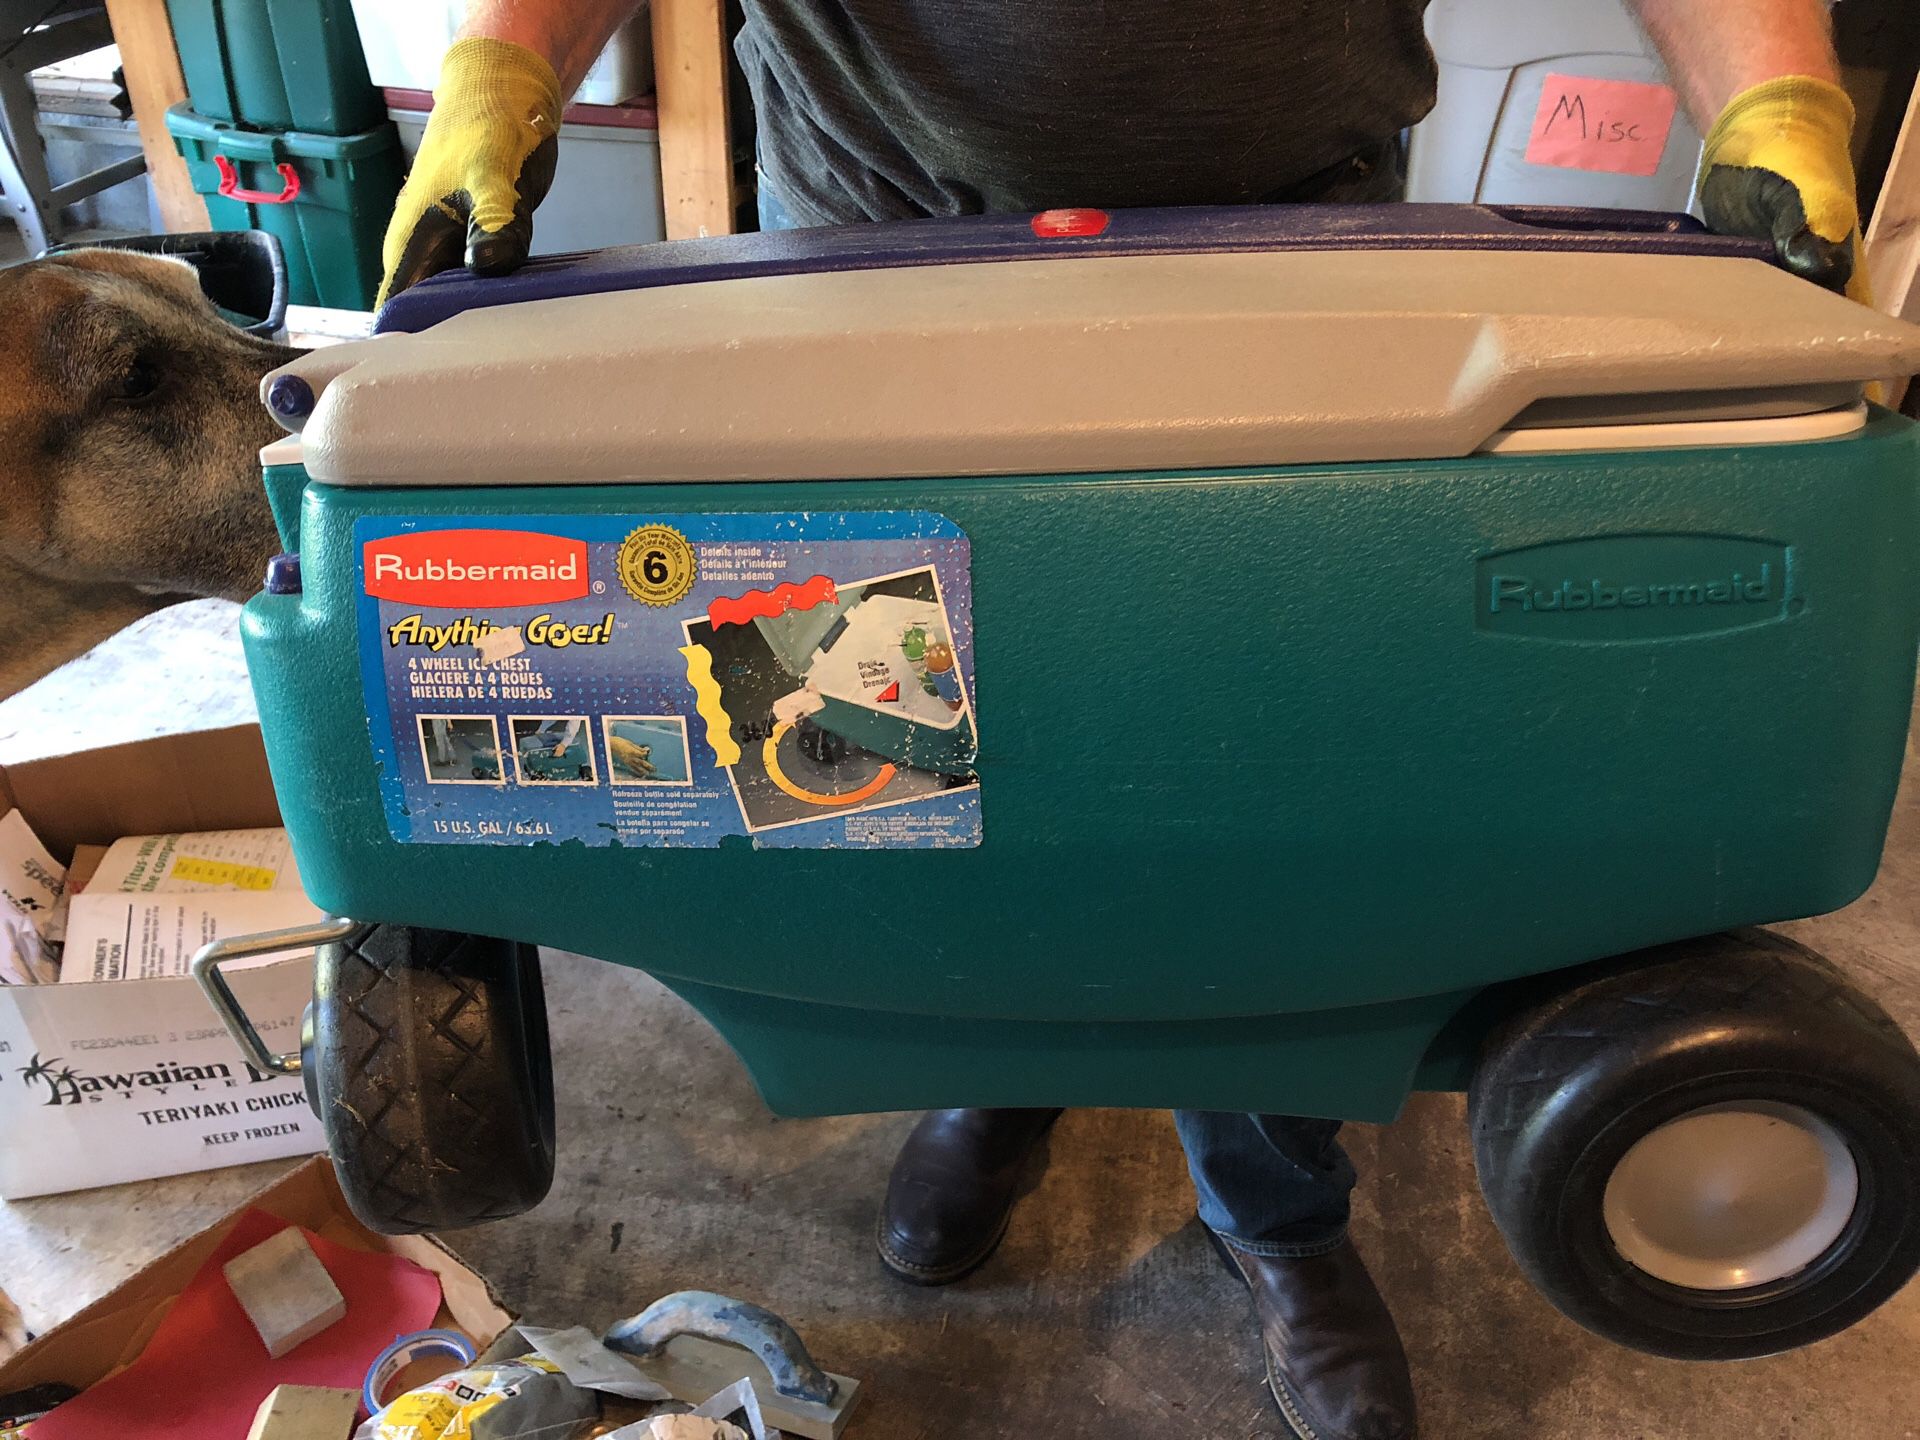 Gorilla Gadgets Air Cooler for Sale in Lakewood, WA - OfferUp